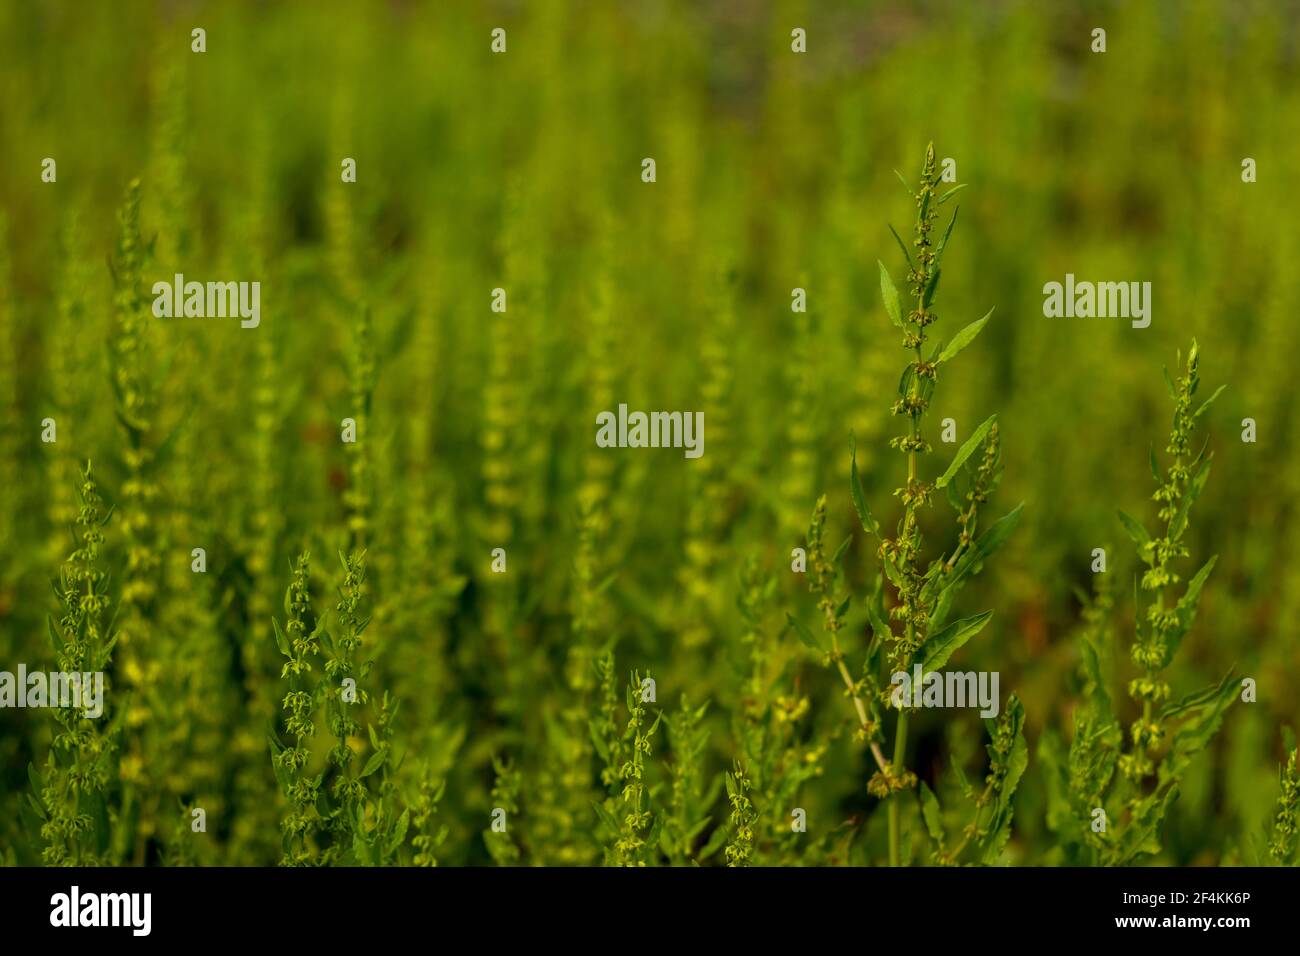 The wild pattern grass plant that name is Mosyakin and Clemants or Dysphania ambrosioides Stock Photo